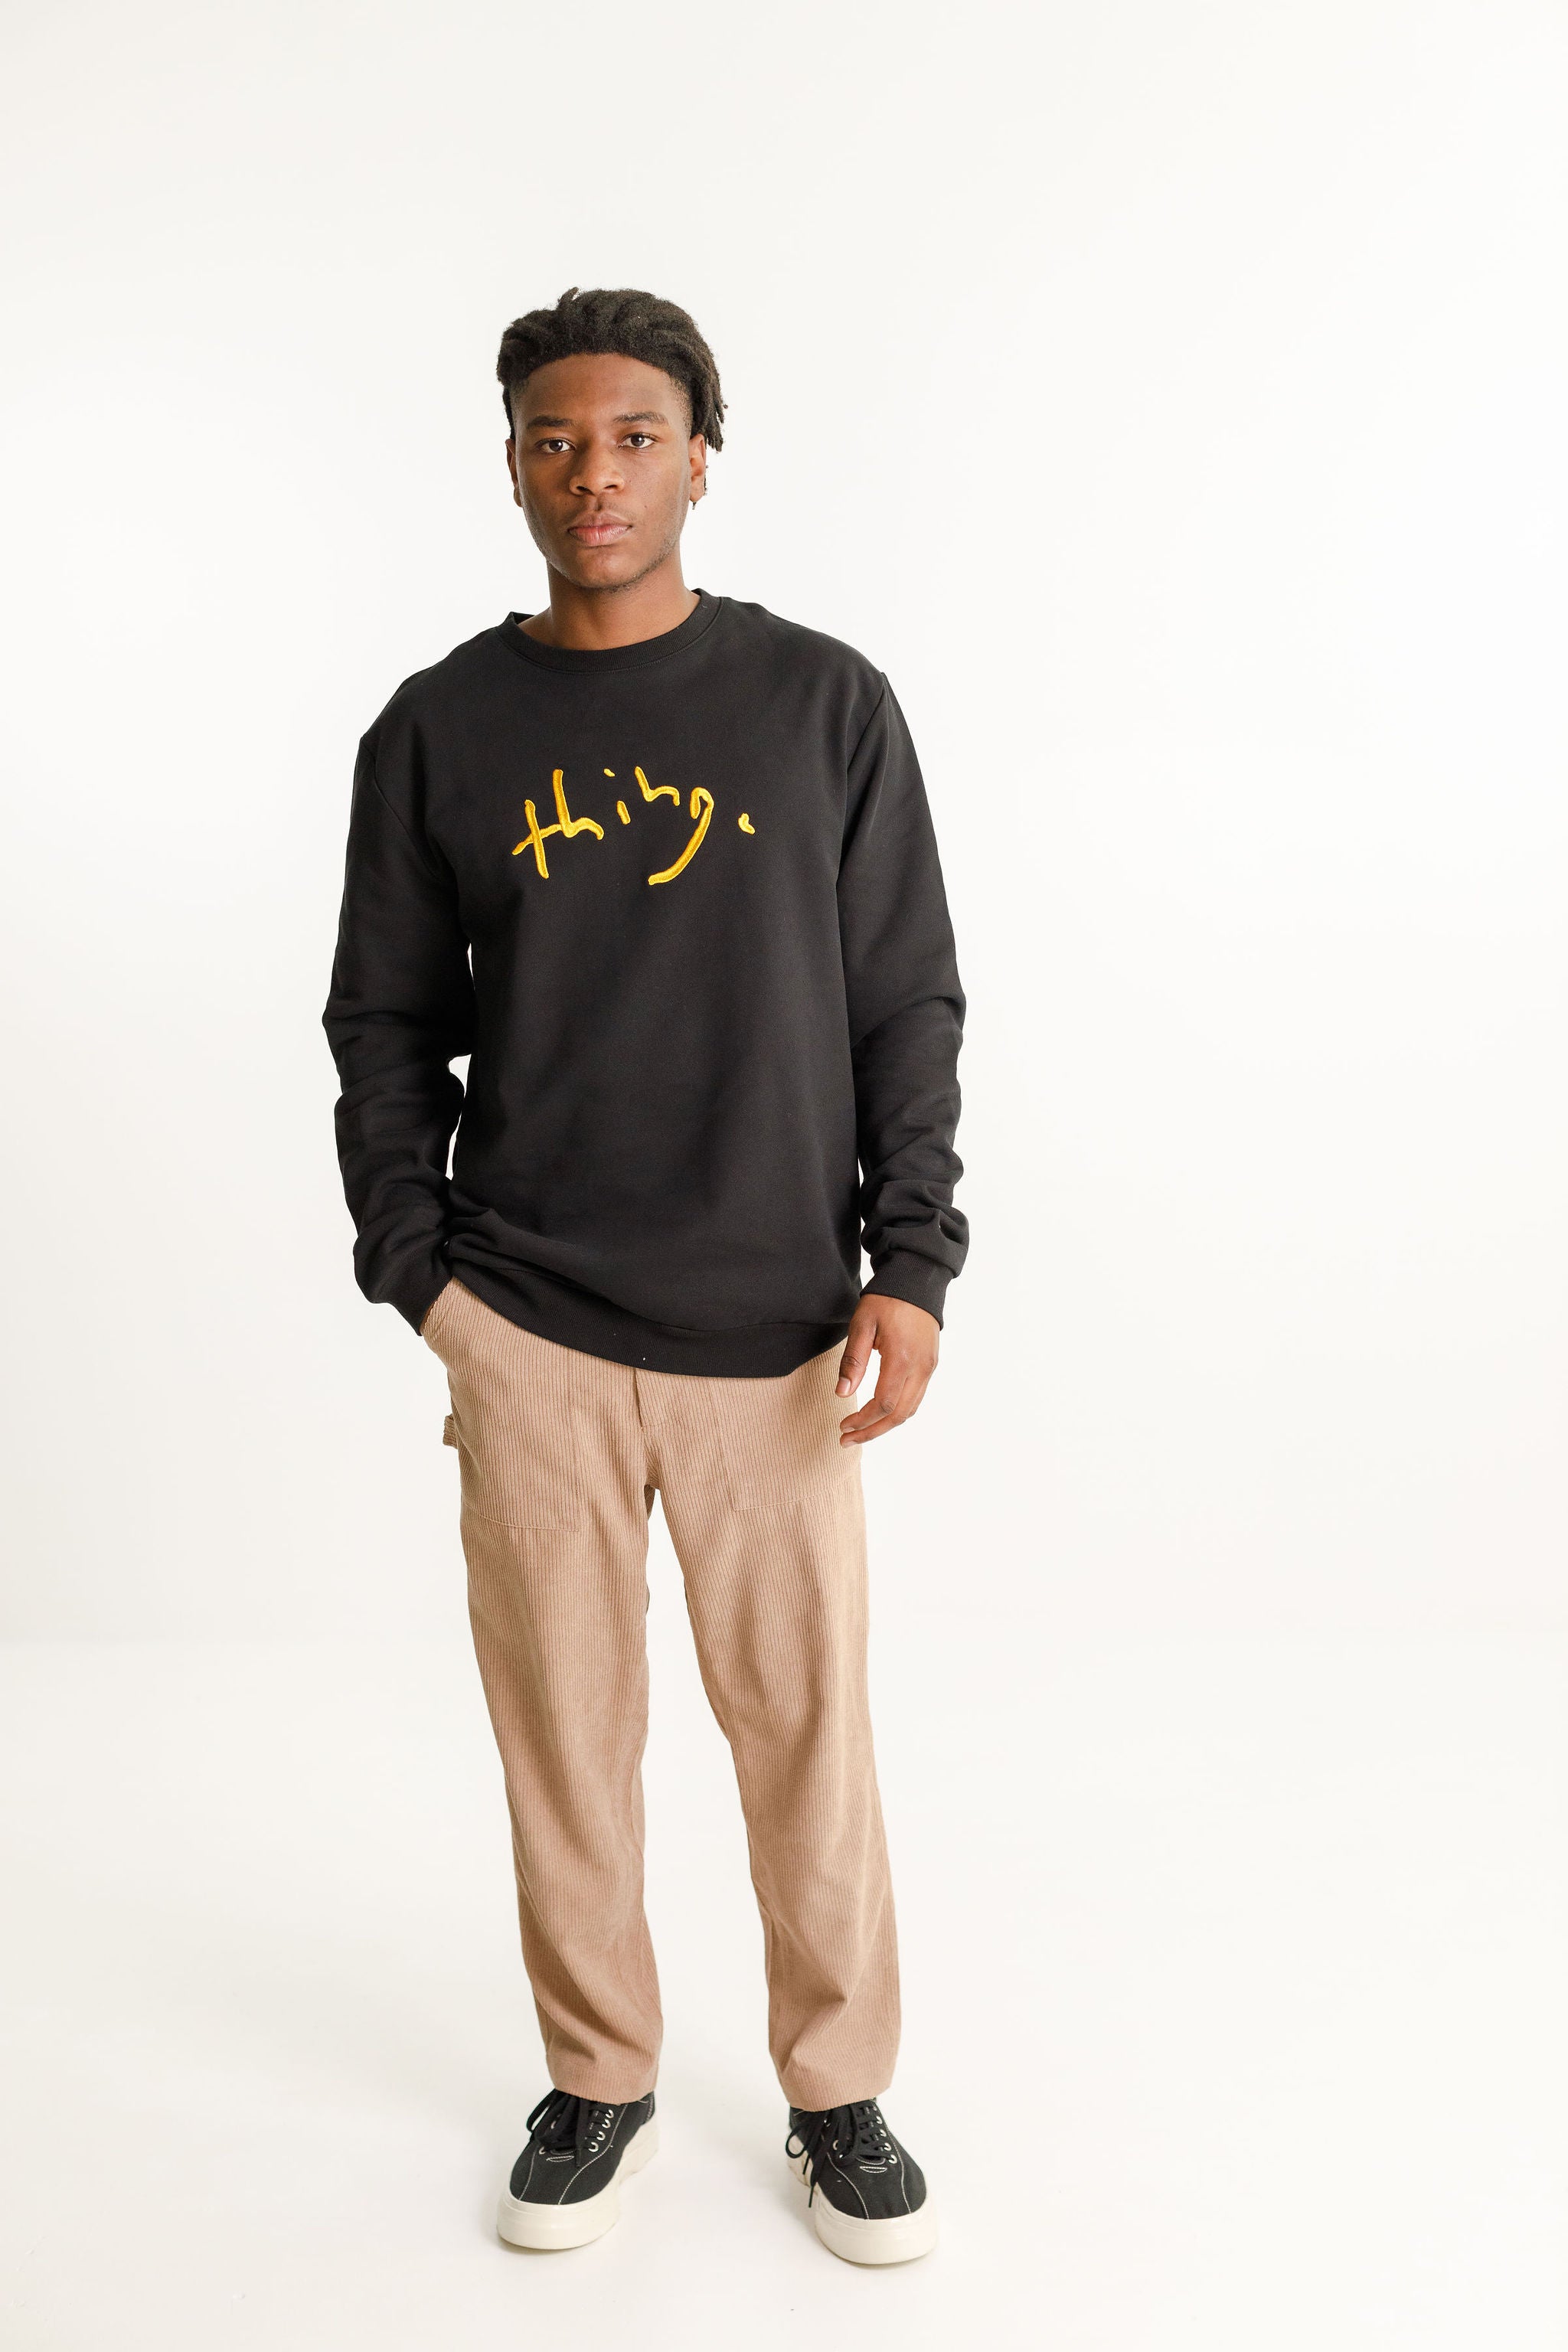 Title Crew - Sale - Black with Gold Thing Embroidery